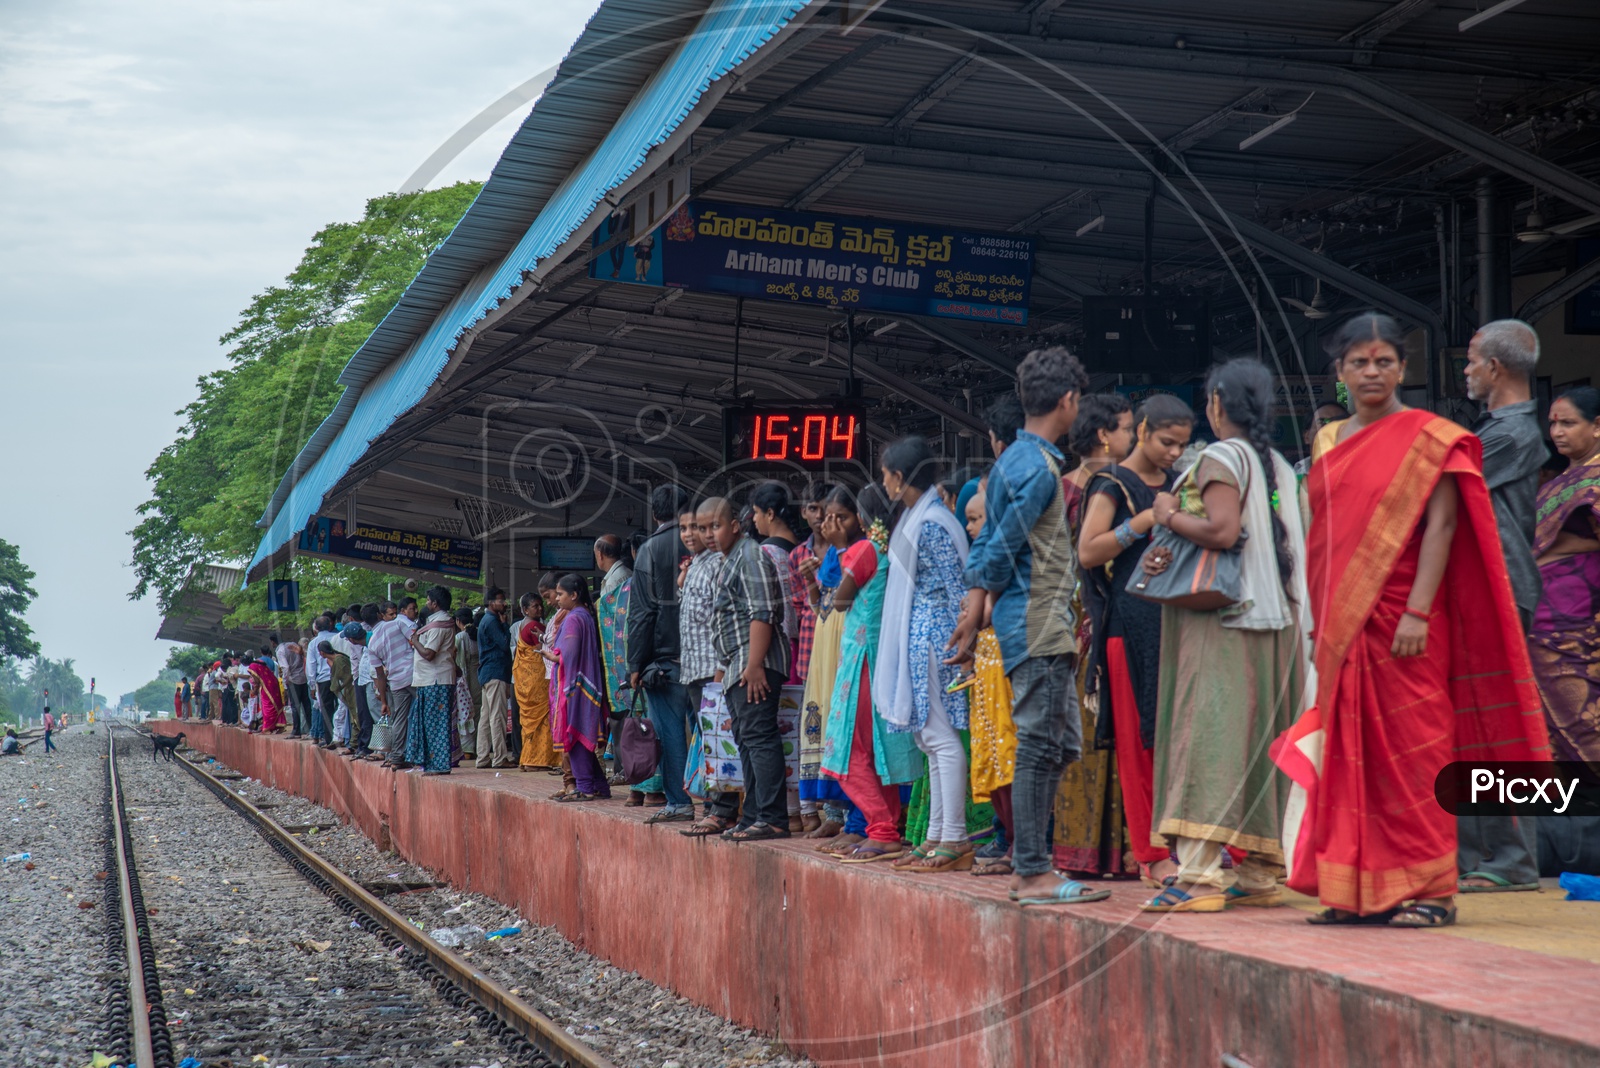 Passengers waiting for a Train at Repalle Railway Station